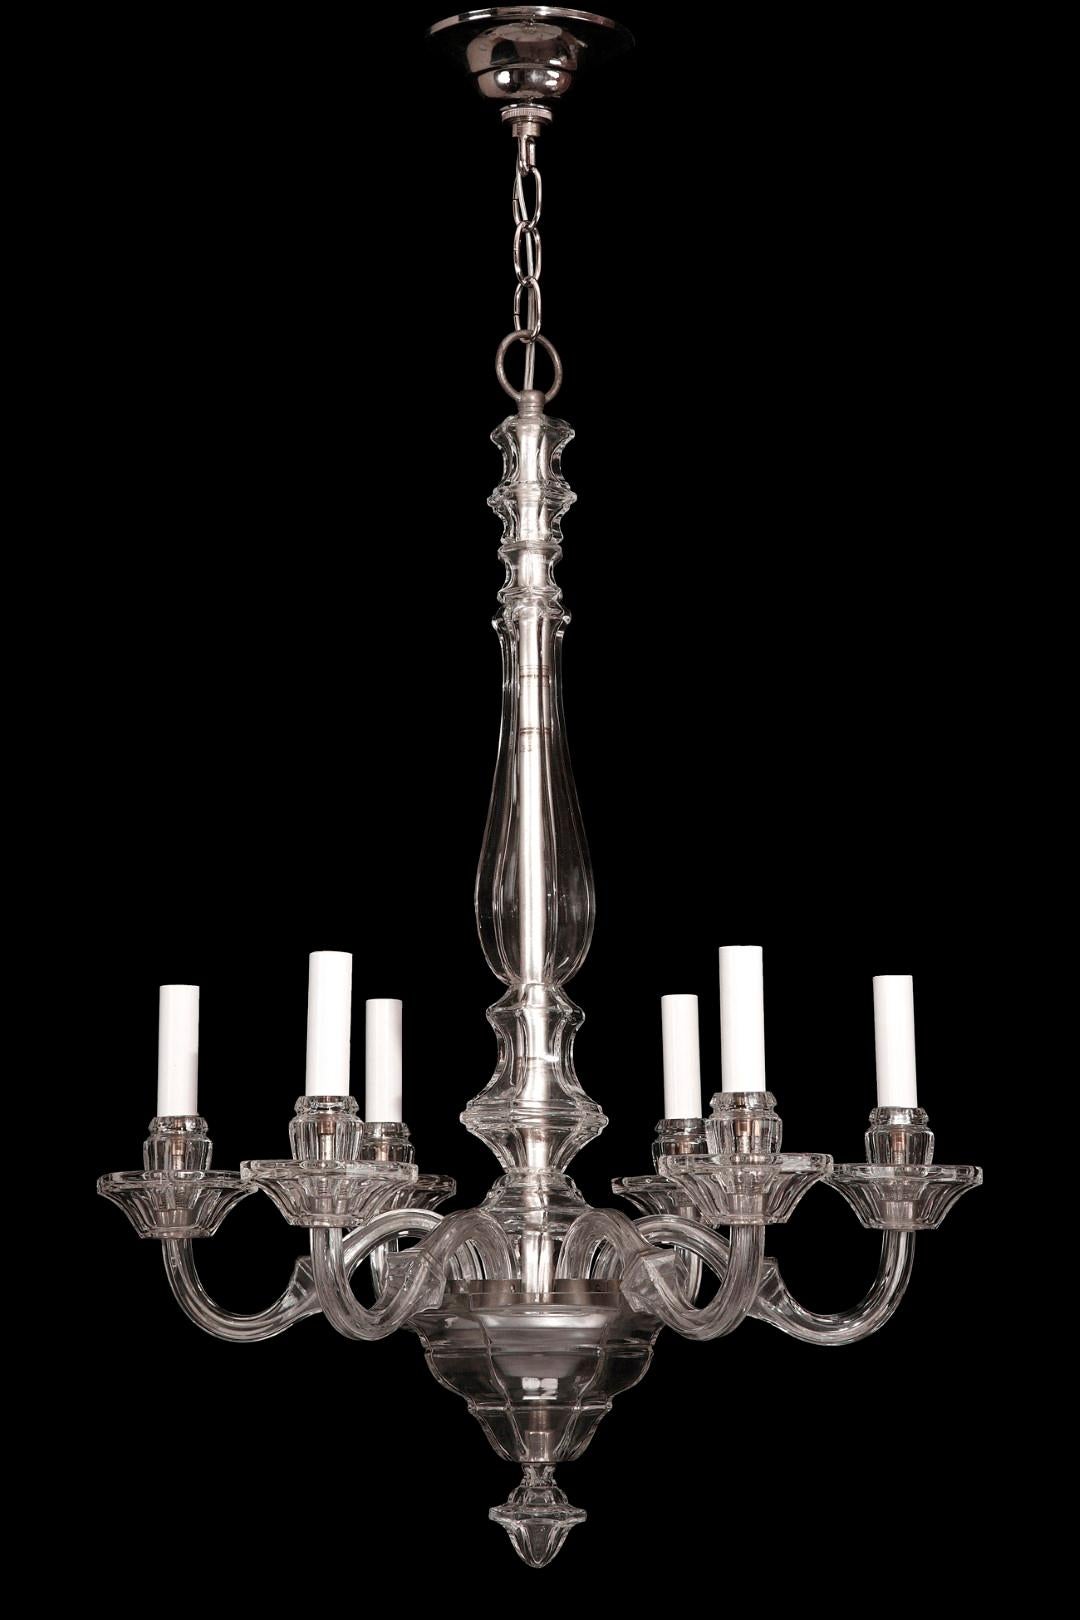 Cut crystal Baccarat style chandelier. French made in 1930s. Cleaned and rewired. Please note, this item is located in one of our NYC locations.